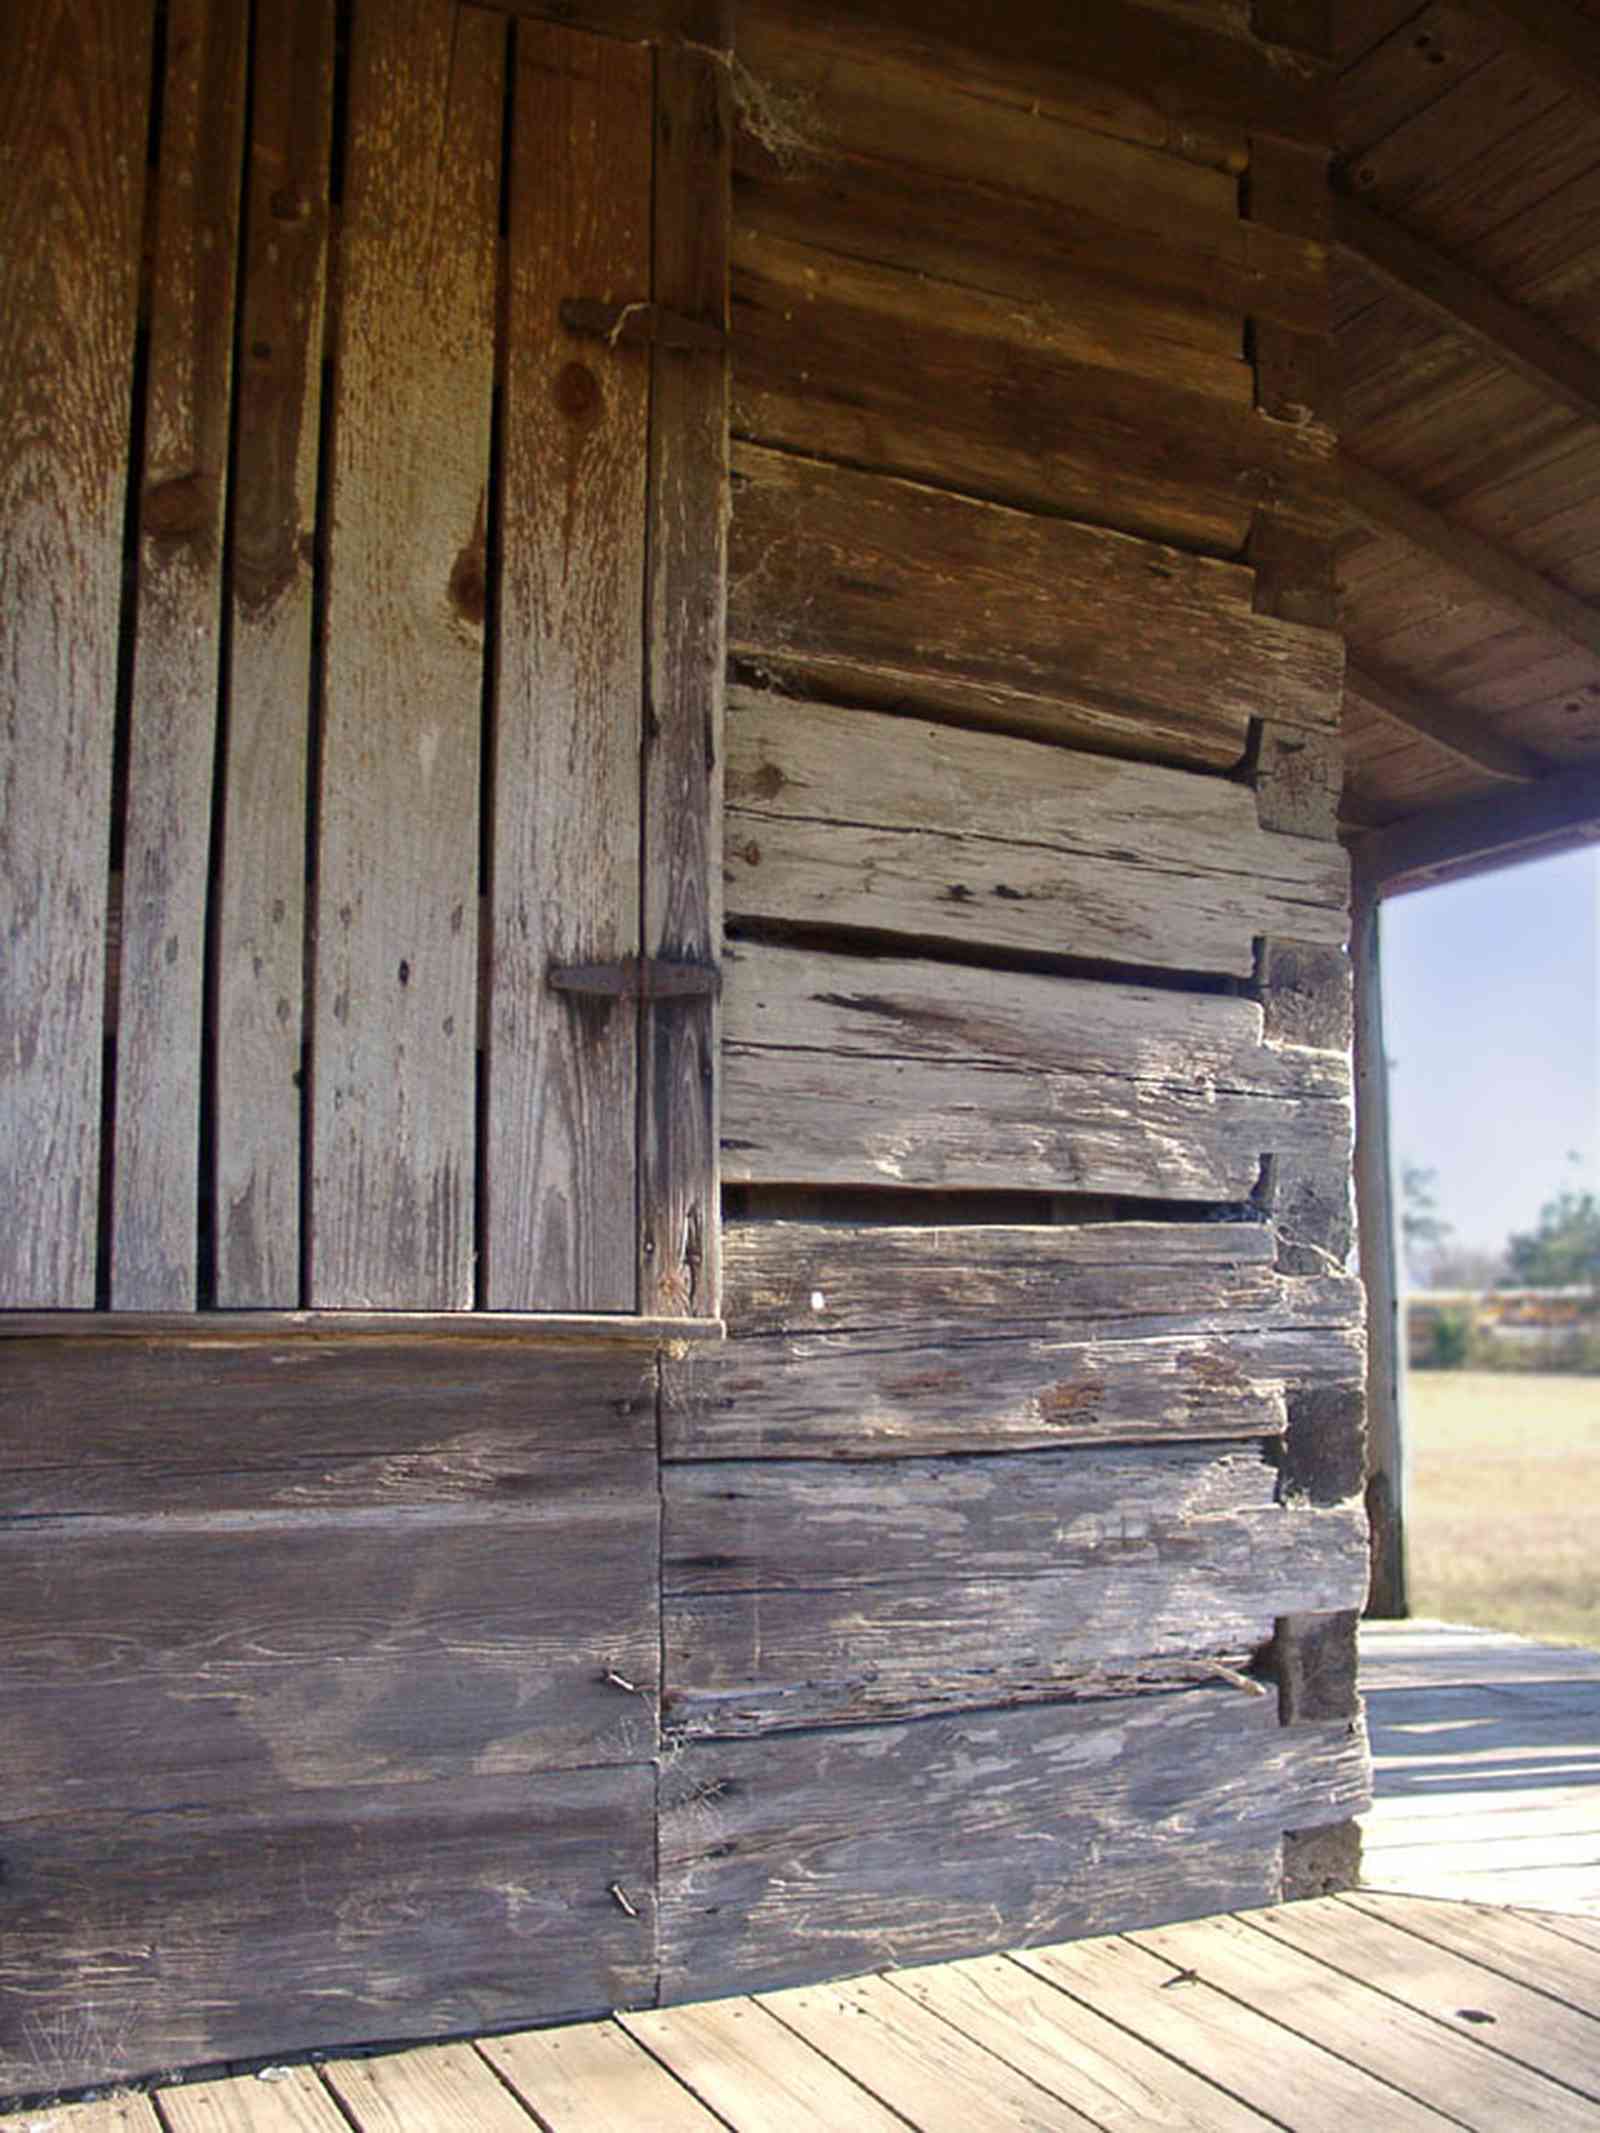 Walnut-Hill:-School_06.jpg:  log cabin, mortise and tendon joints, shutters, porch, cotton field